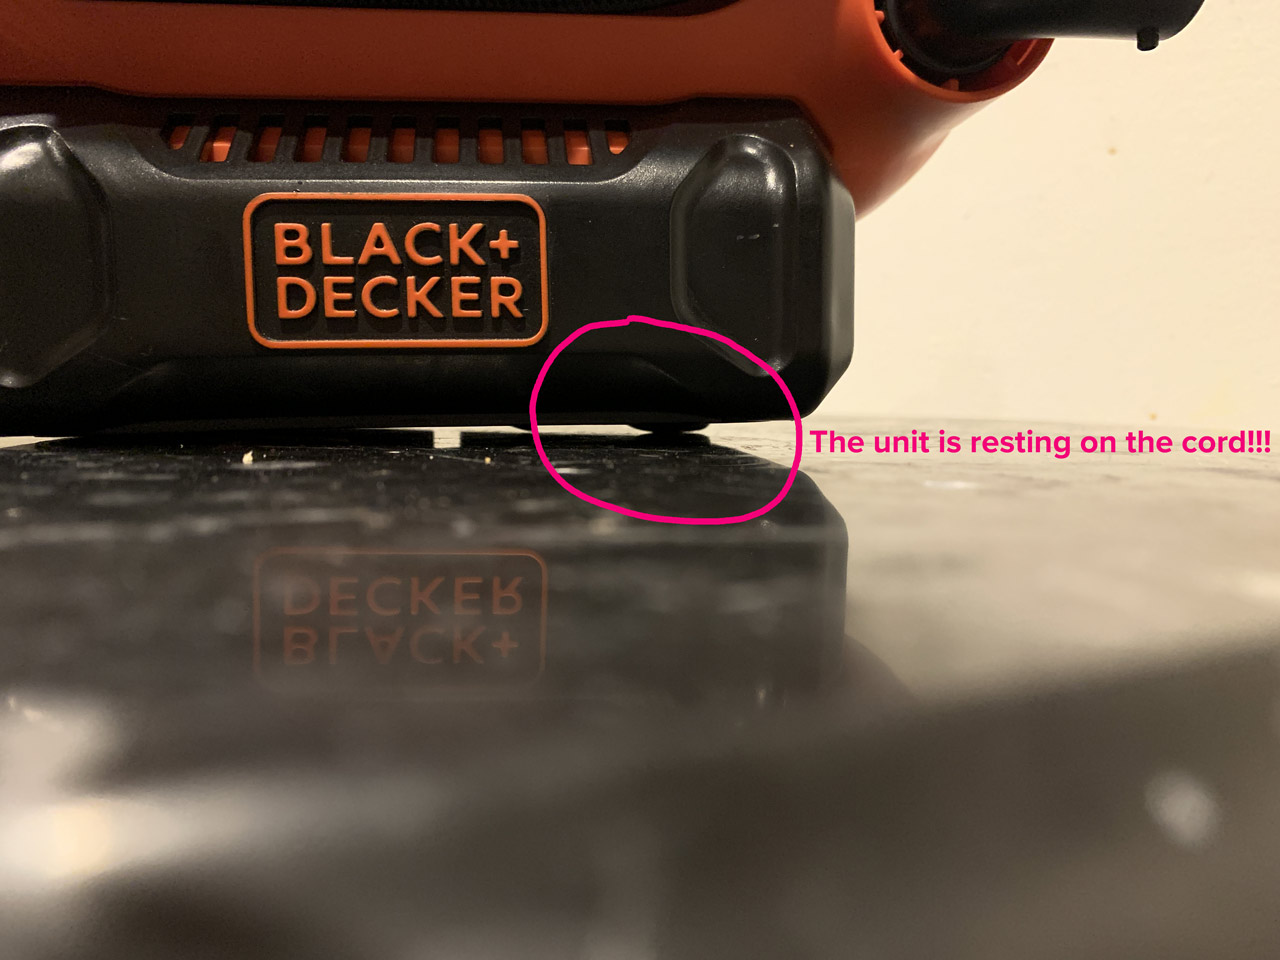 Black & Decker 20V MAX Multi-Purpose Inflator rests on the power cable due to a design flaw